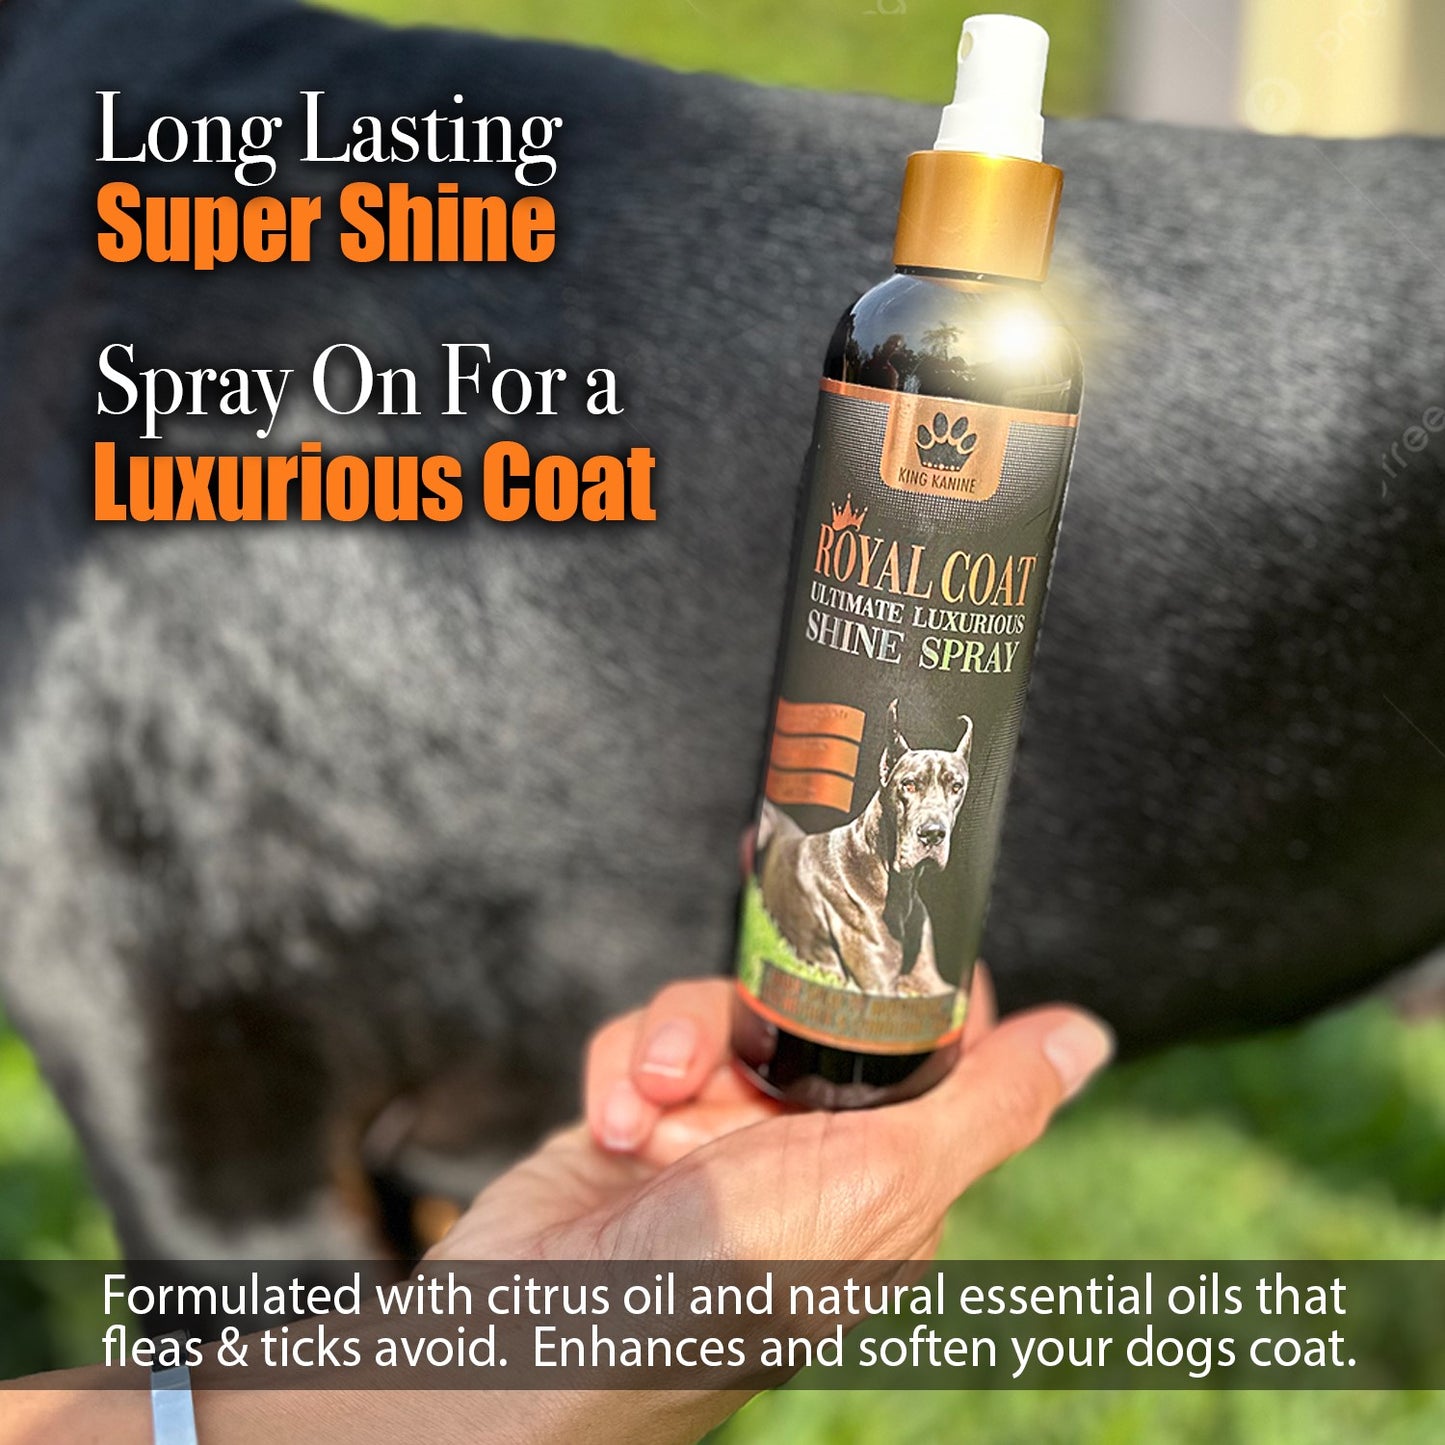 NEW!!! Royal Coat Ultimate Luxurious SHINE SPRAY - dogs only